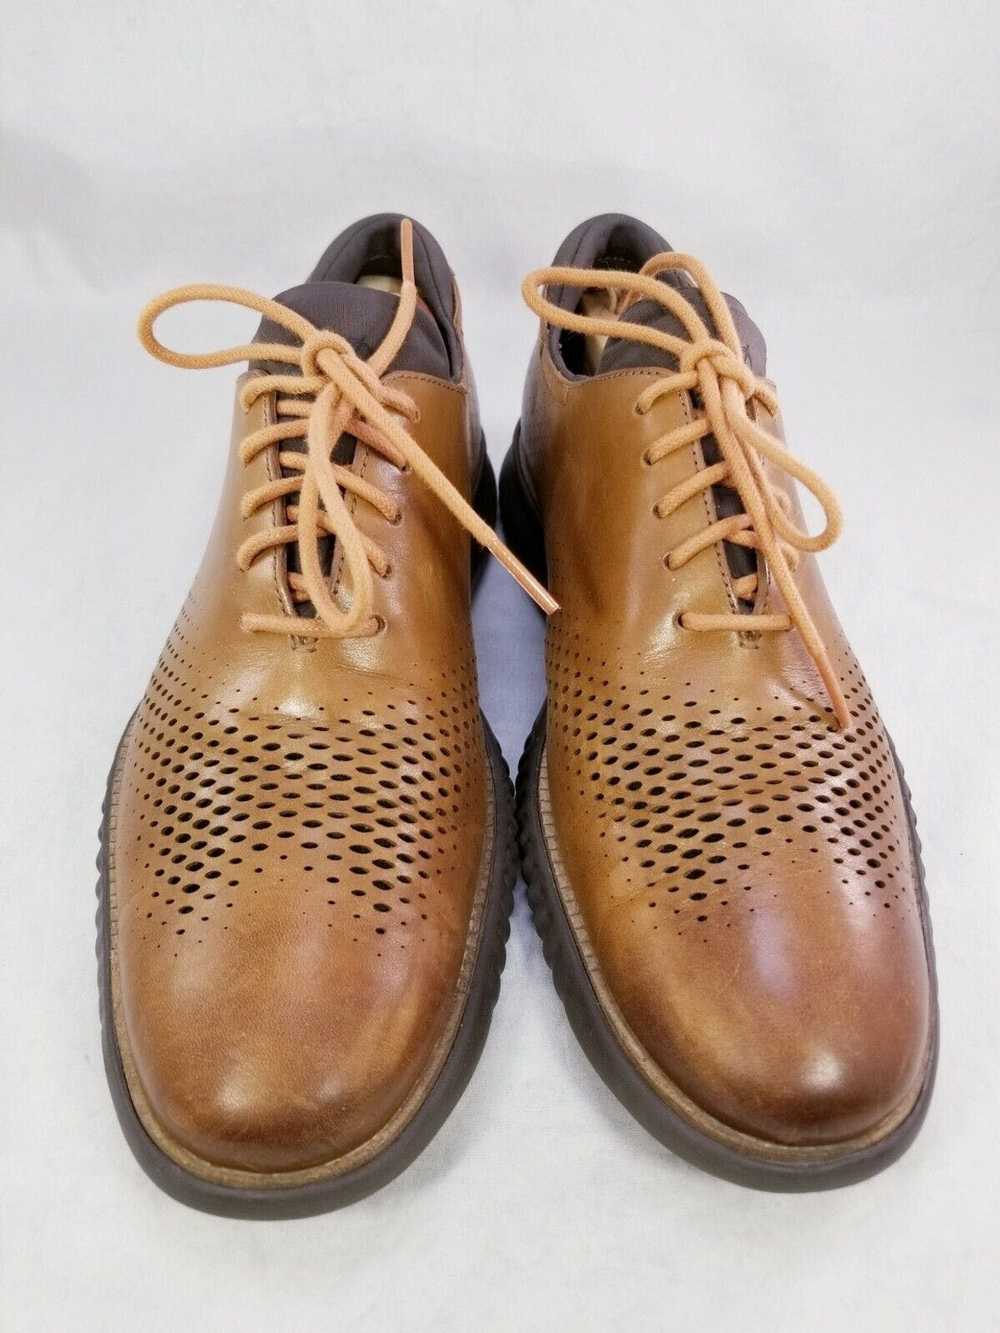 Cole Haan zerogrand 2.0 leather shoes oxfords - image 9